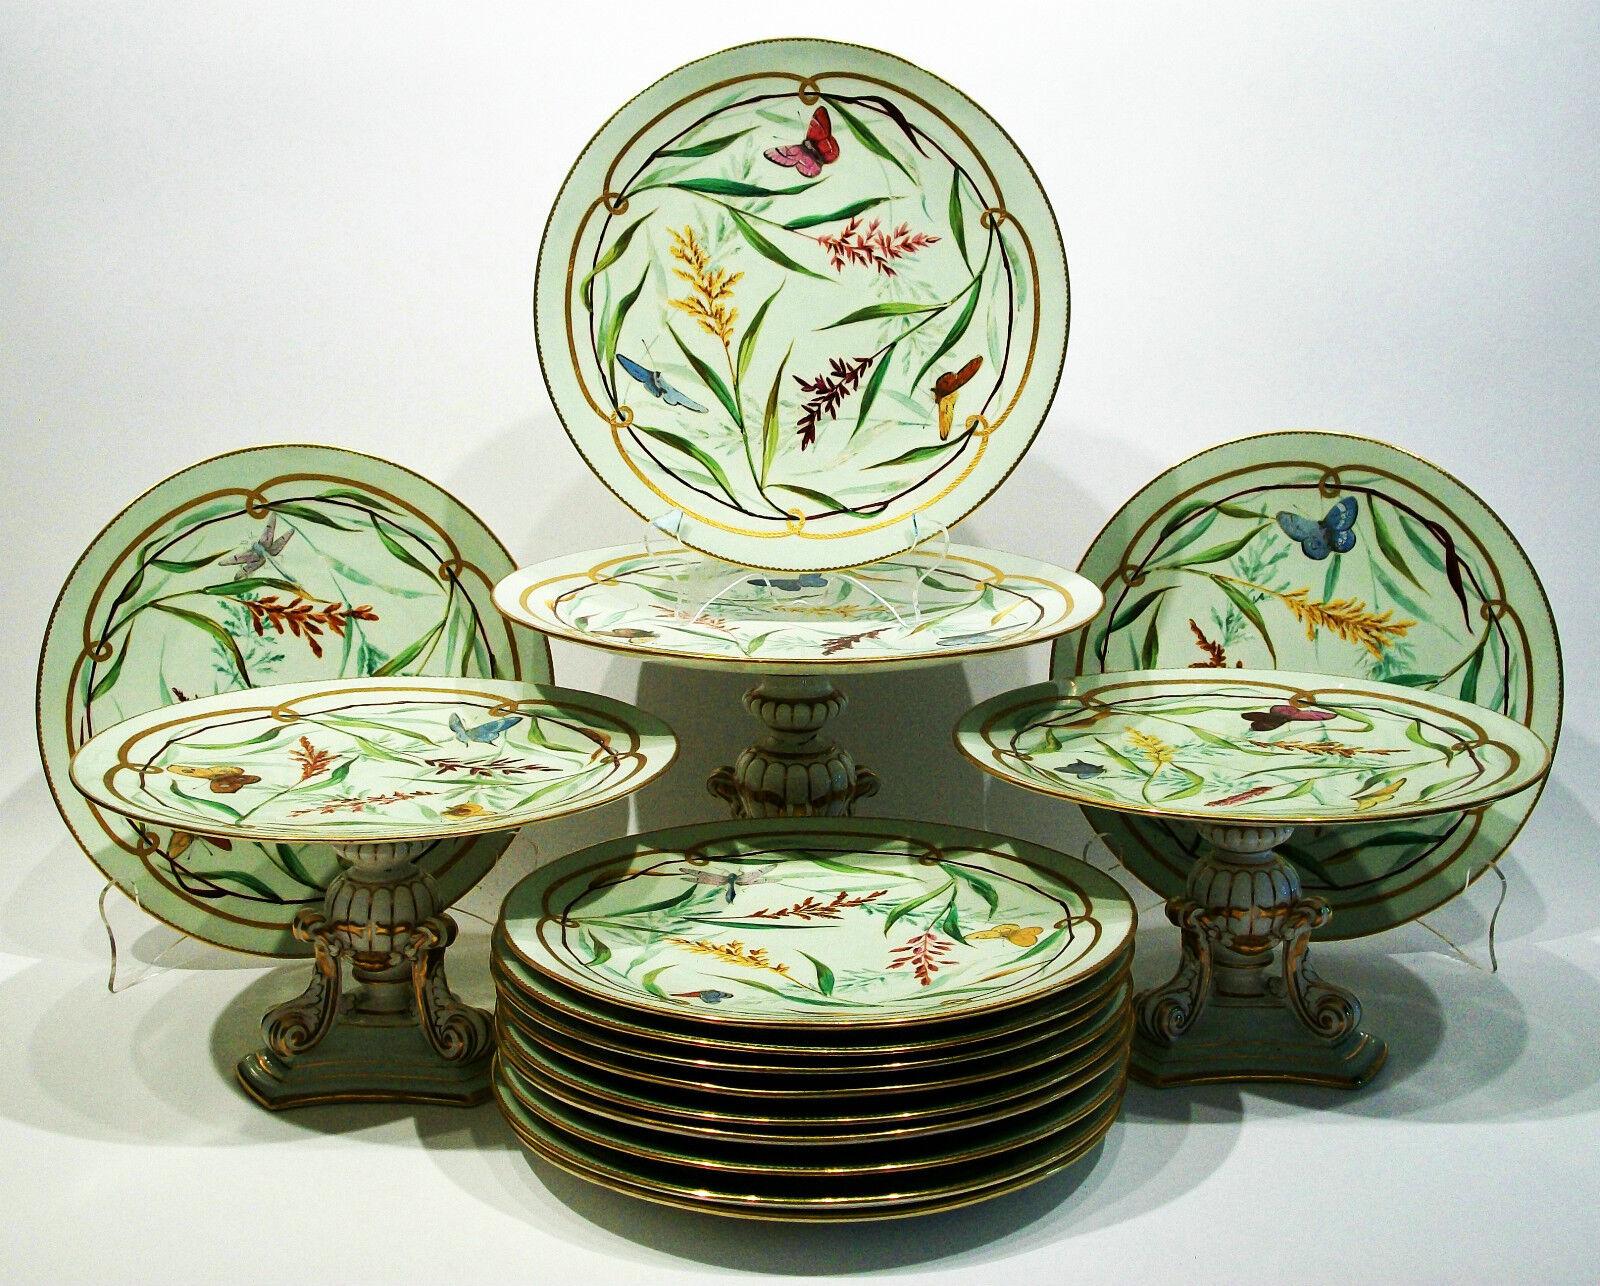 James Green & Nephew (manufacturer/retailer - active 1834 to 1874) - Rare - museum quality - Victorian/Aesthetic Movement - antique porcelain luncheon or dessert service - hand painted with butterflies in relief along with dragonflies - all set